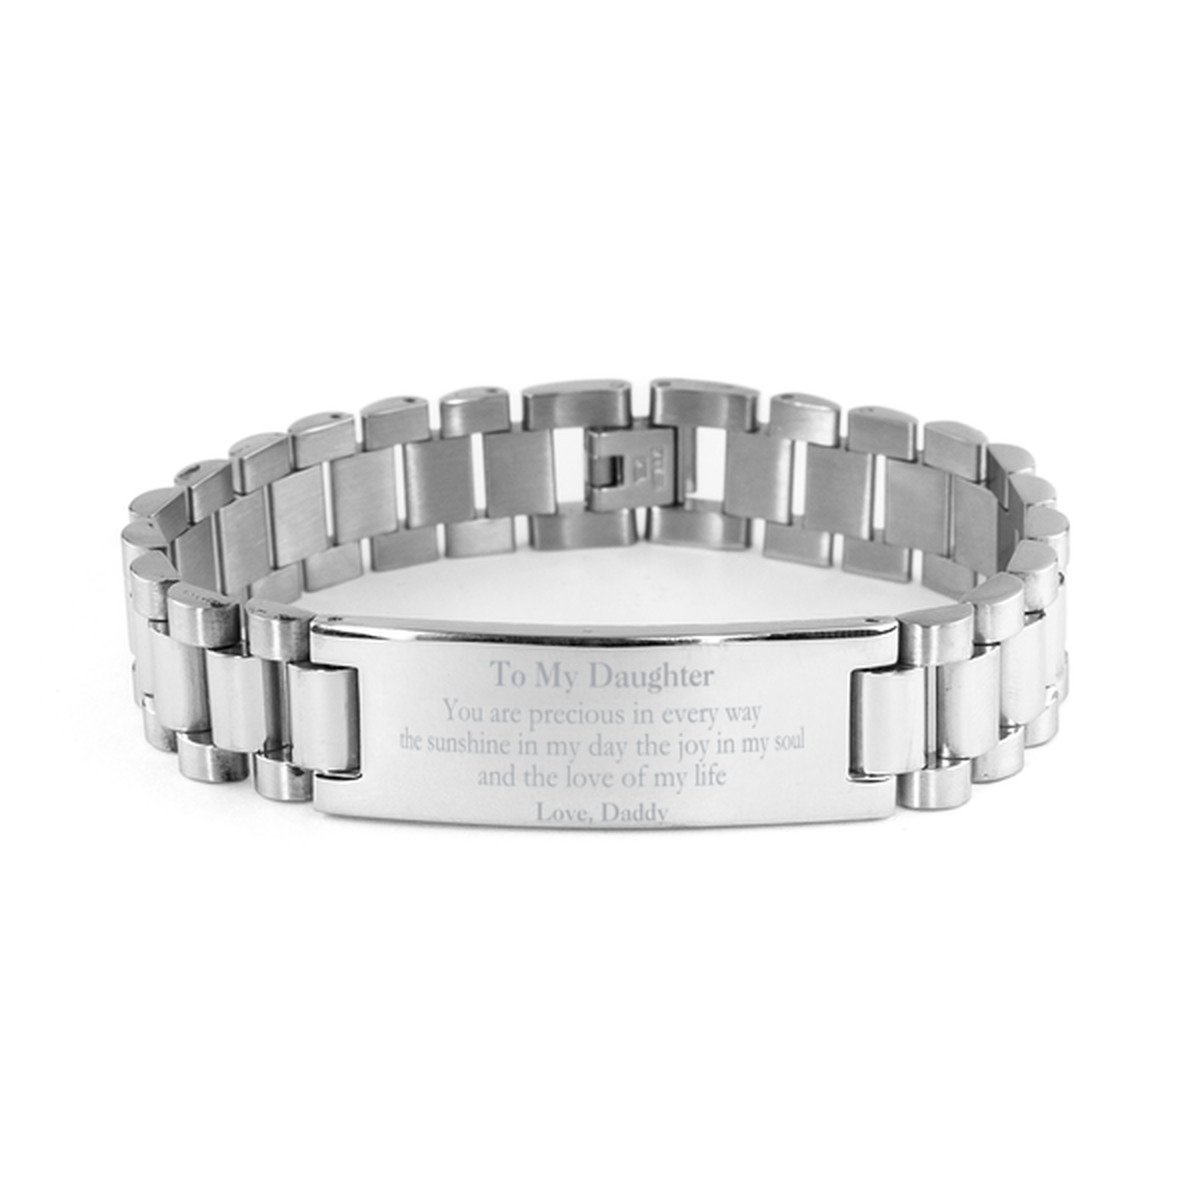 Graduation Gifts for Daughter Ladder Stainless Steel Bracelet Present from Daddy, Christmas Daughter Birthday Gifts Daughter You are precious in every way the sunshine in my day. Love, Daddy